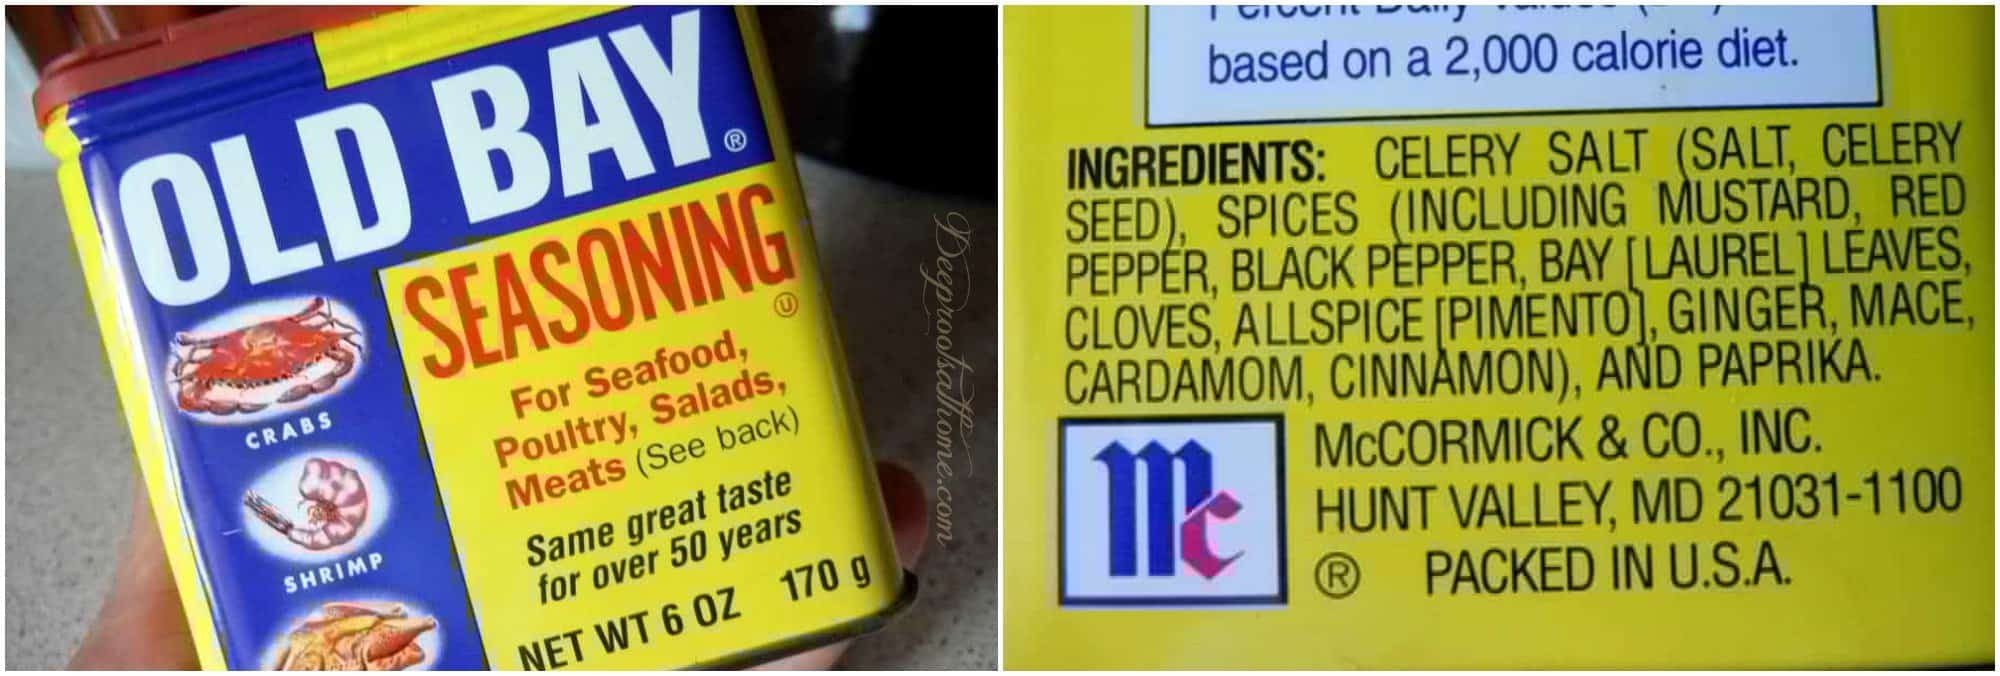 Old Bay, a seasoning for poultry and seafood.